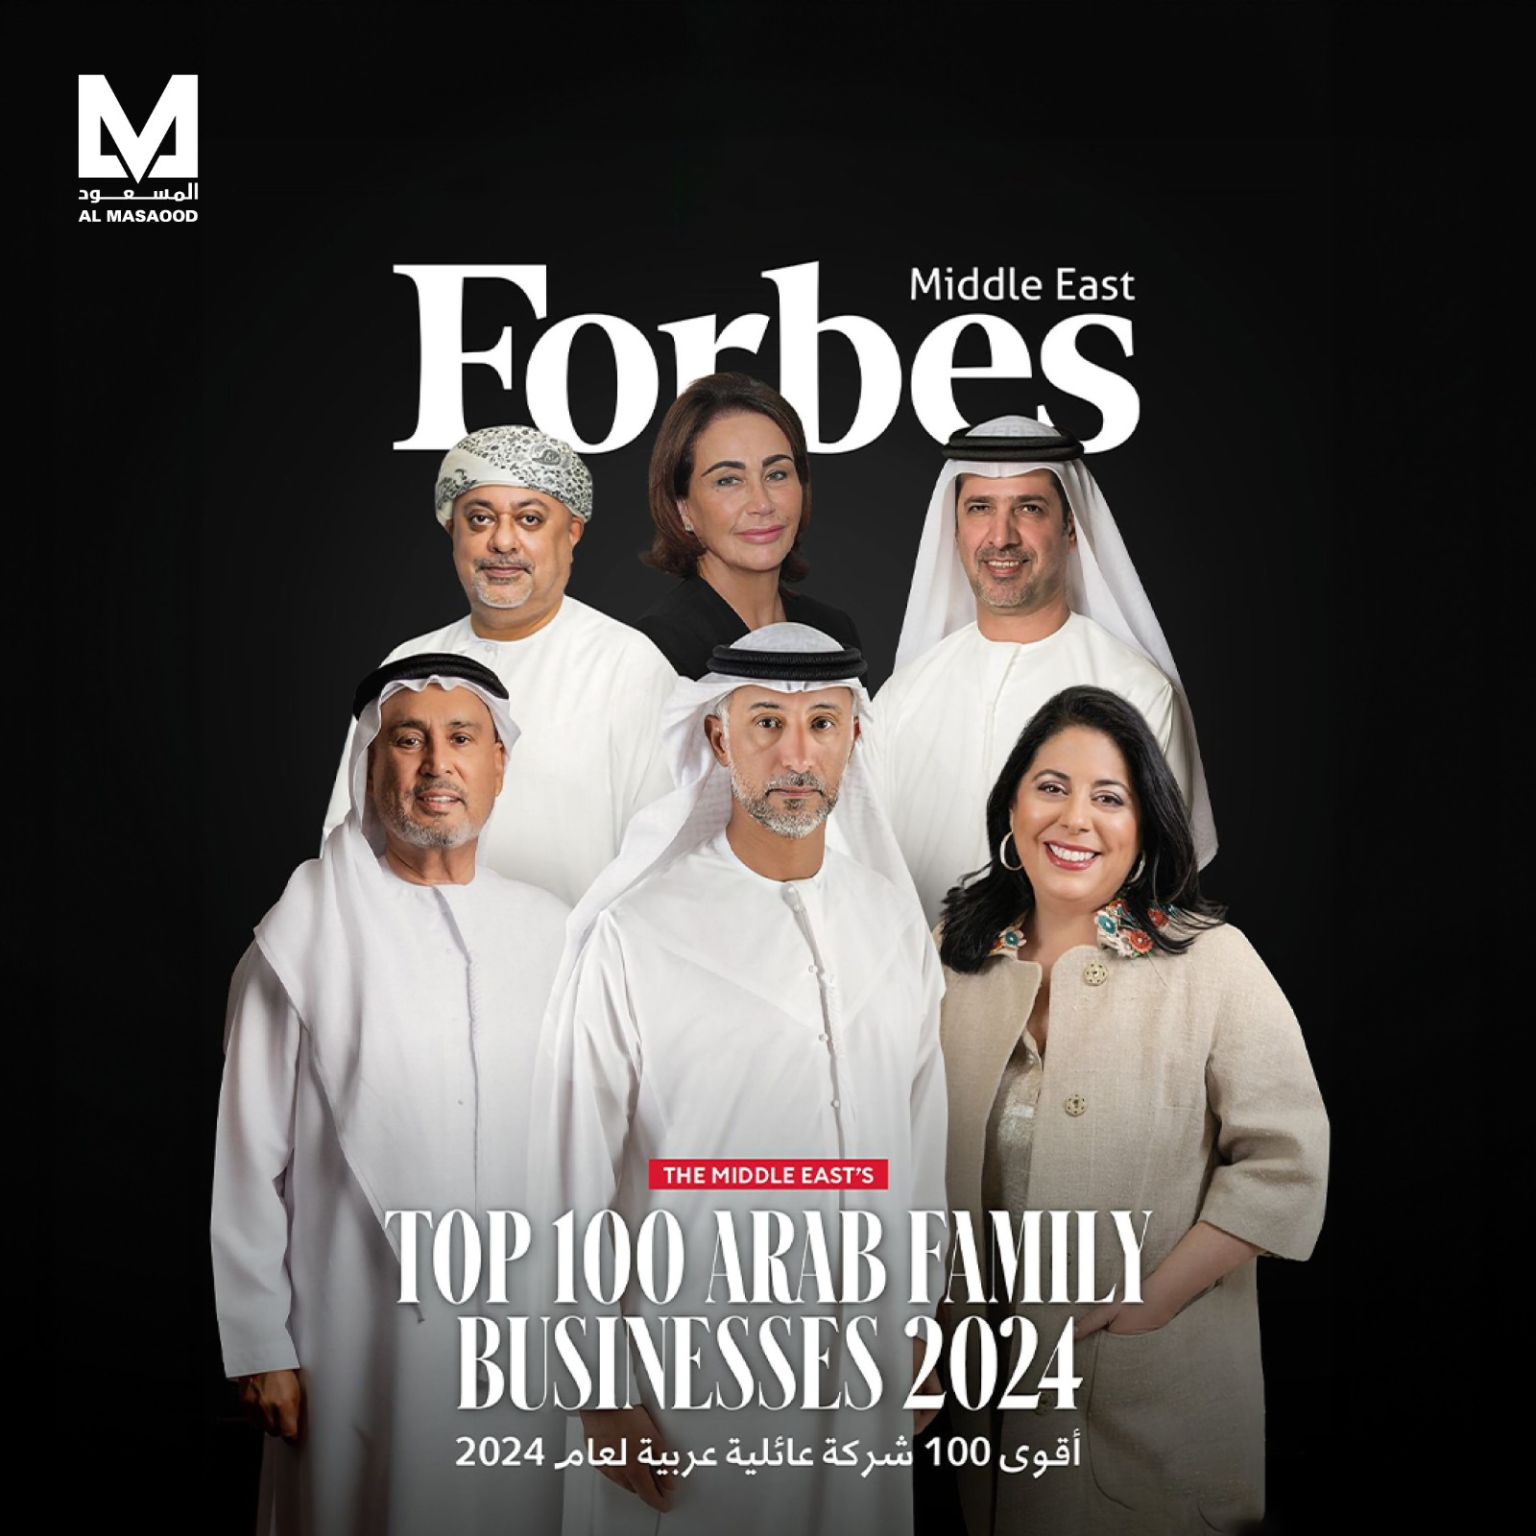 Al Masaood Group Named one of the Top 100 Arab Family Businesses in the Middle East for Fourth Year in a Row